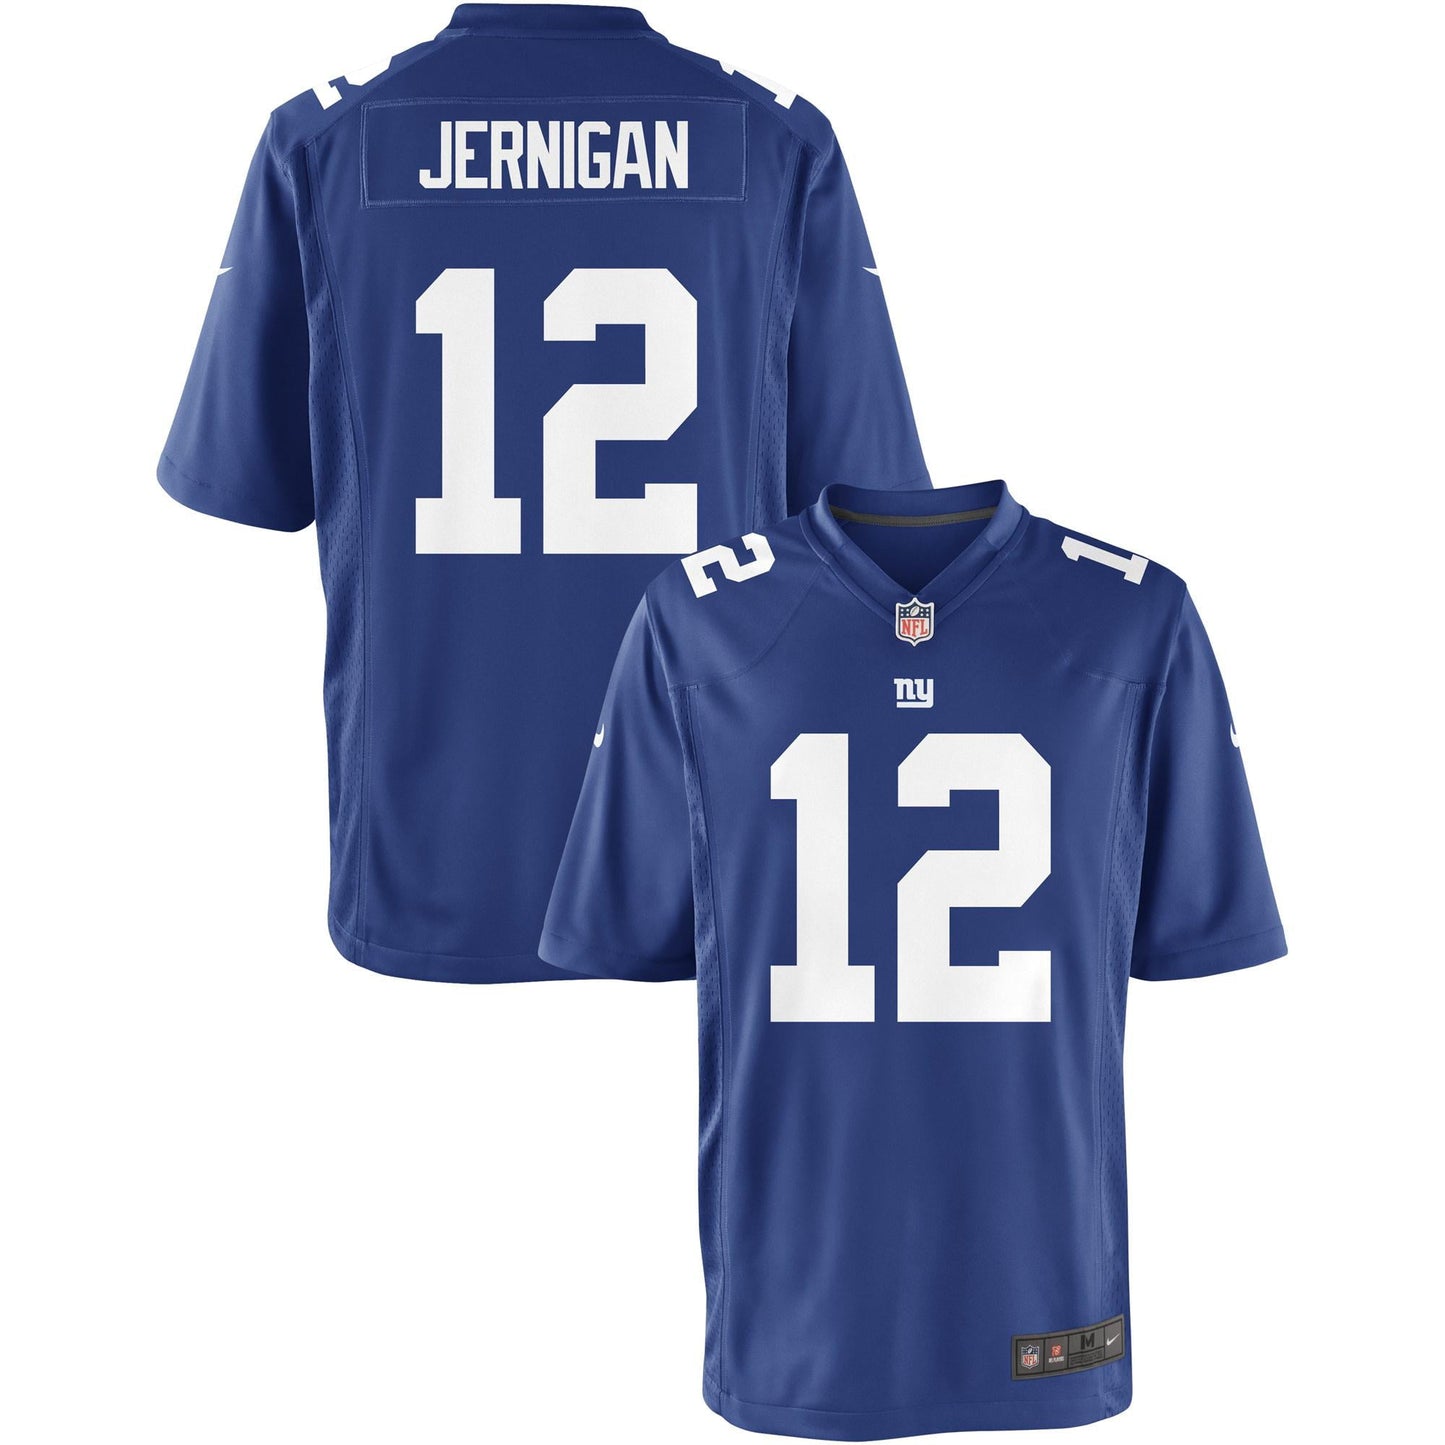 Nike Youth New York Giants Jerrel Jernigan Team Color Game Jersey